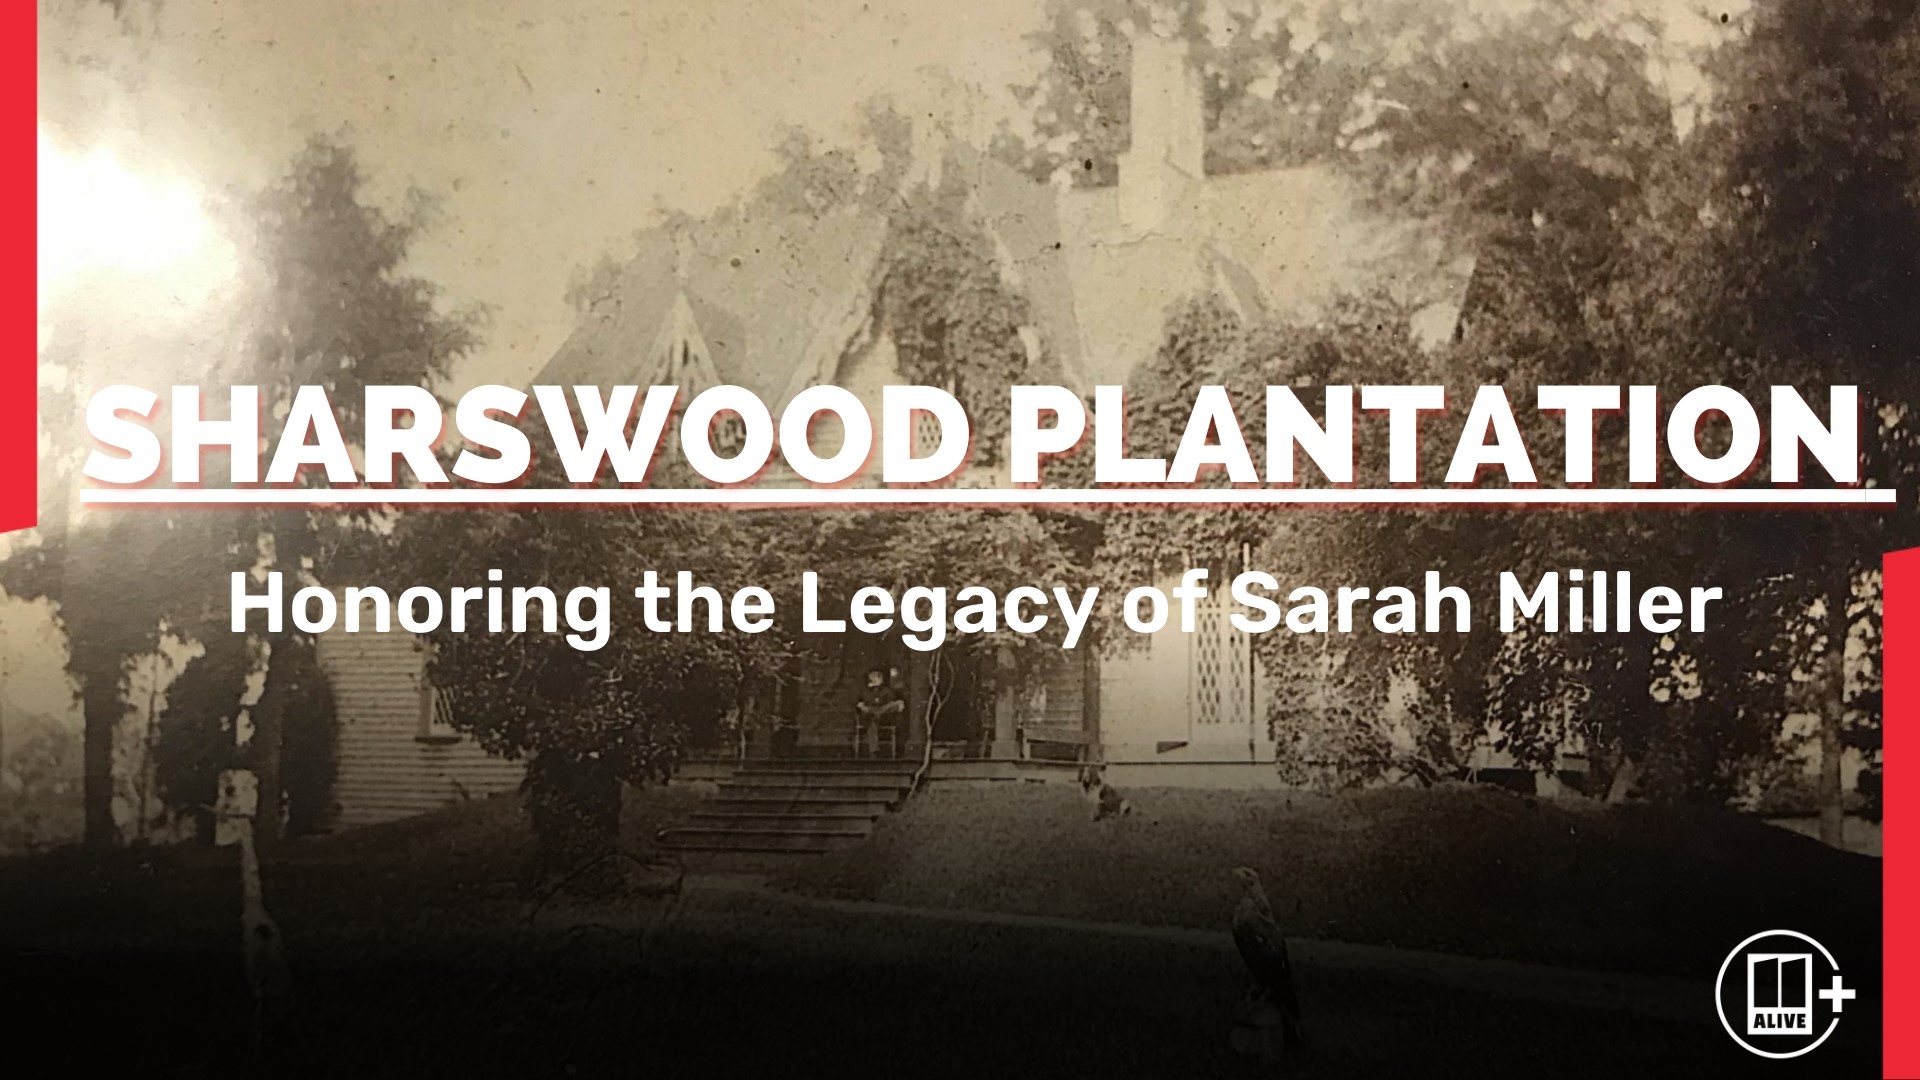 Cheryl Preheim has an in-depth conversation with the writer and producers of 'Sharswood Plantation: Legacy of Sarah Miller'.